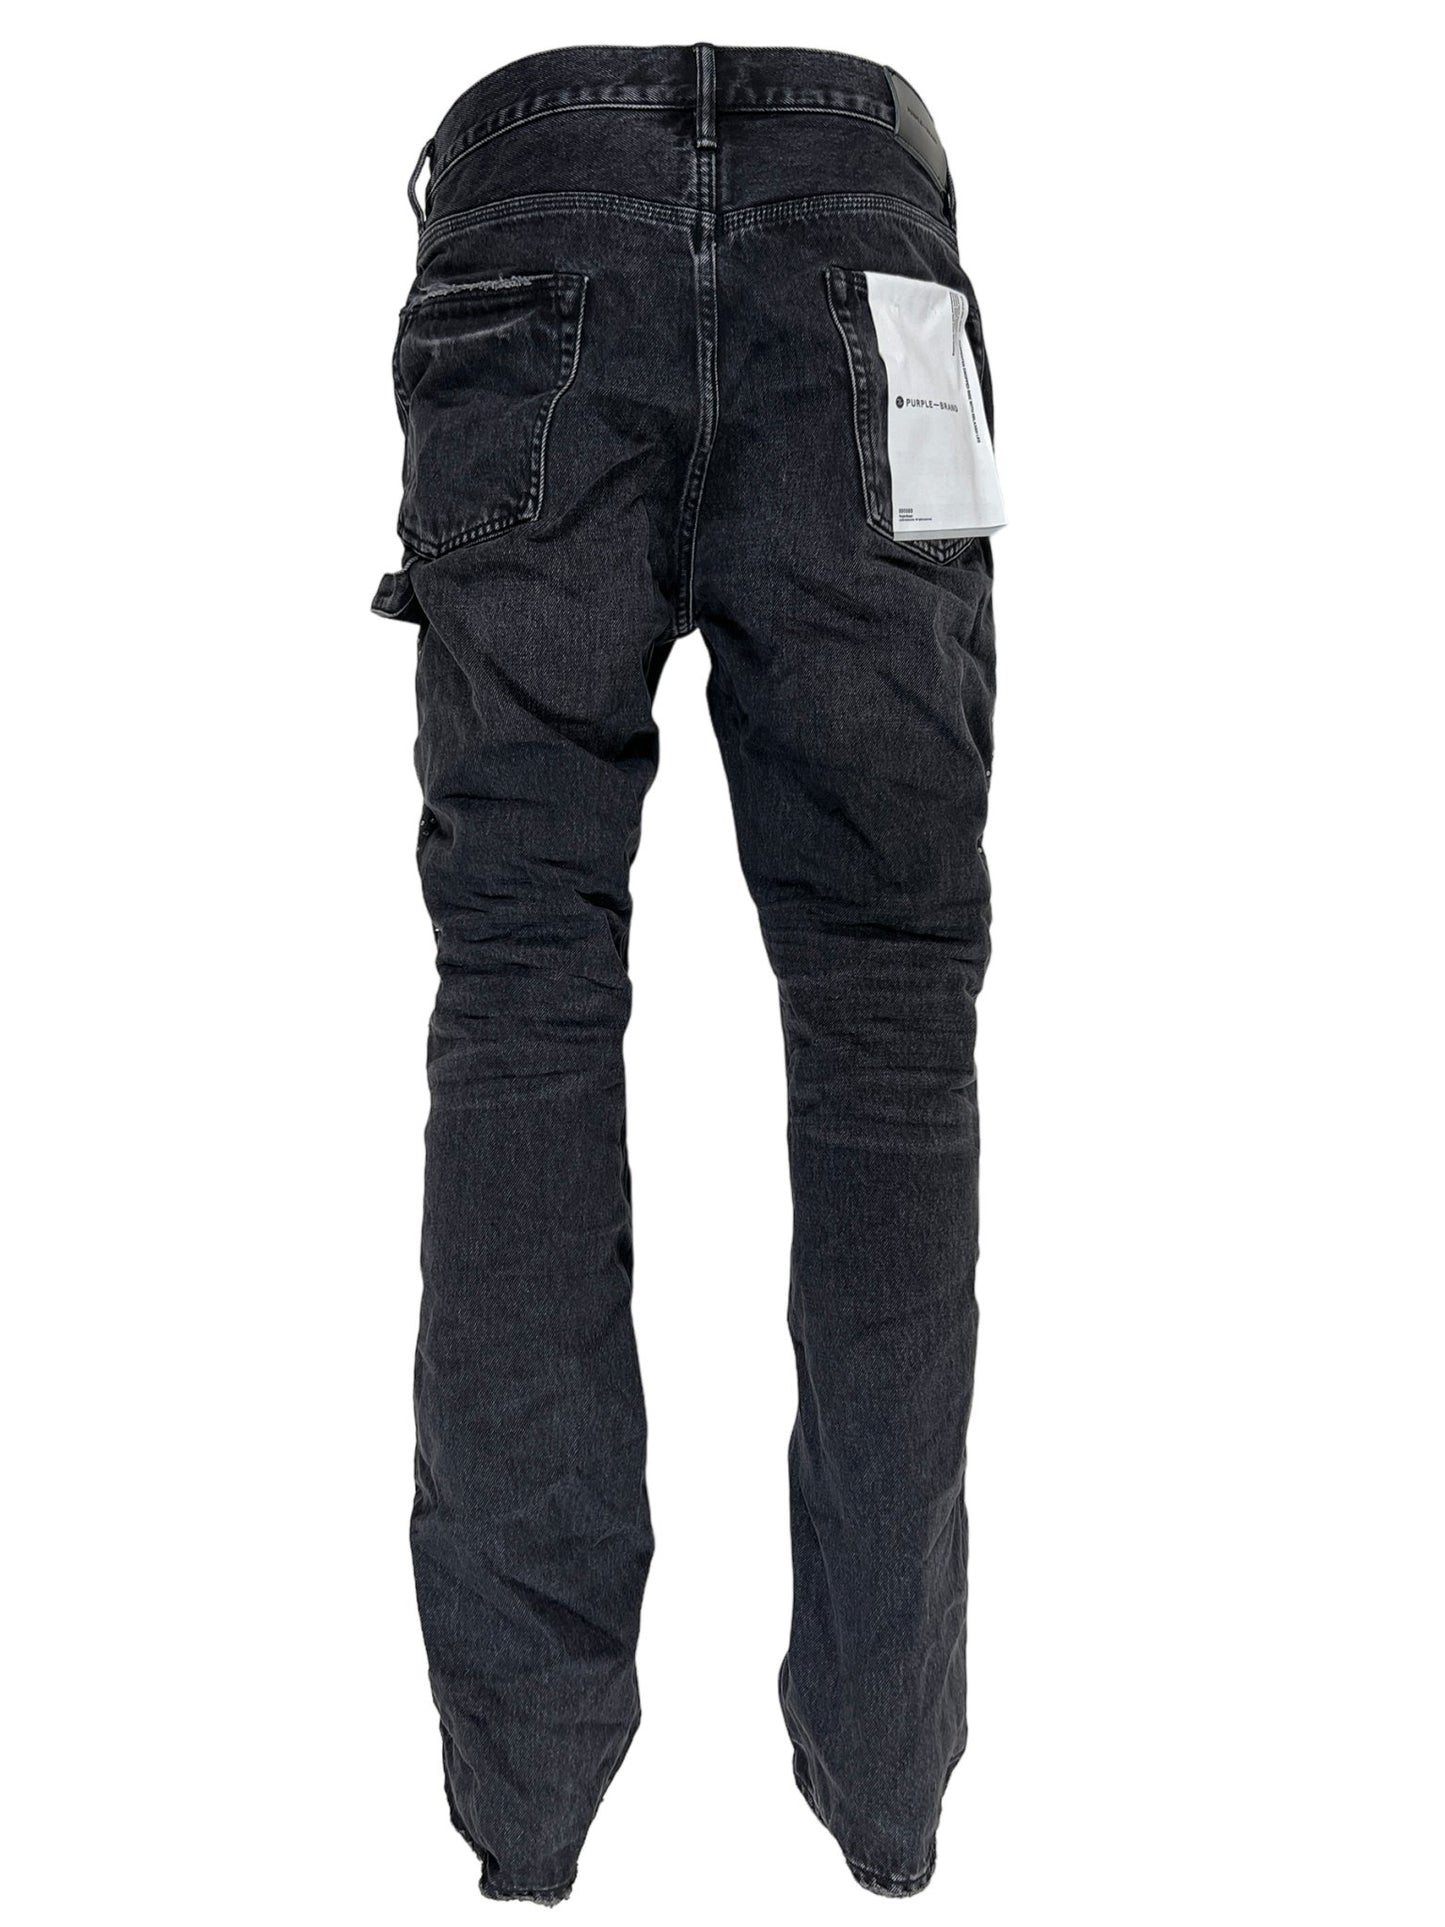 The back view of a pair of PURPLE BRAND JEANS P015-CCBL CRYSTAL CARPENTER BLACK denim jeans.